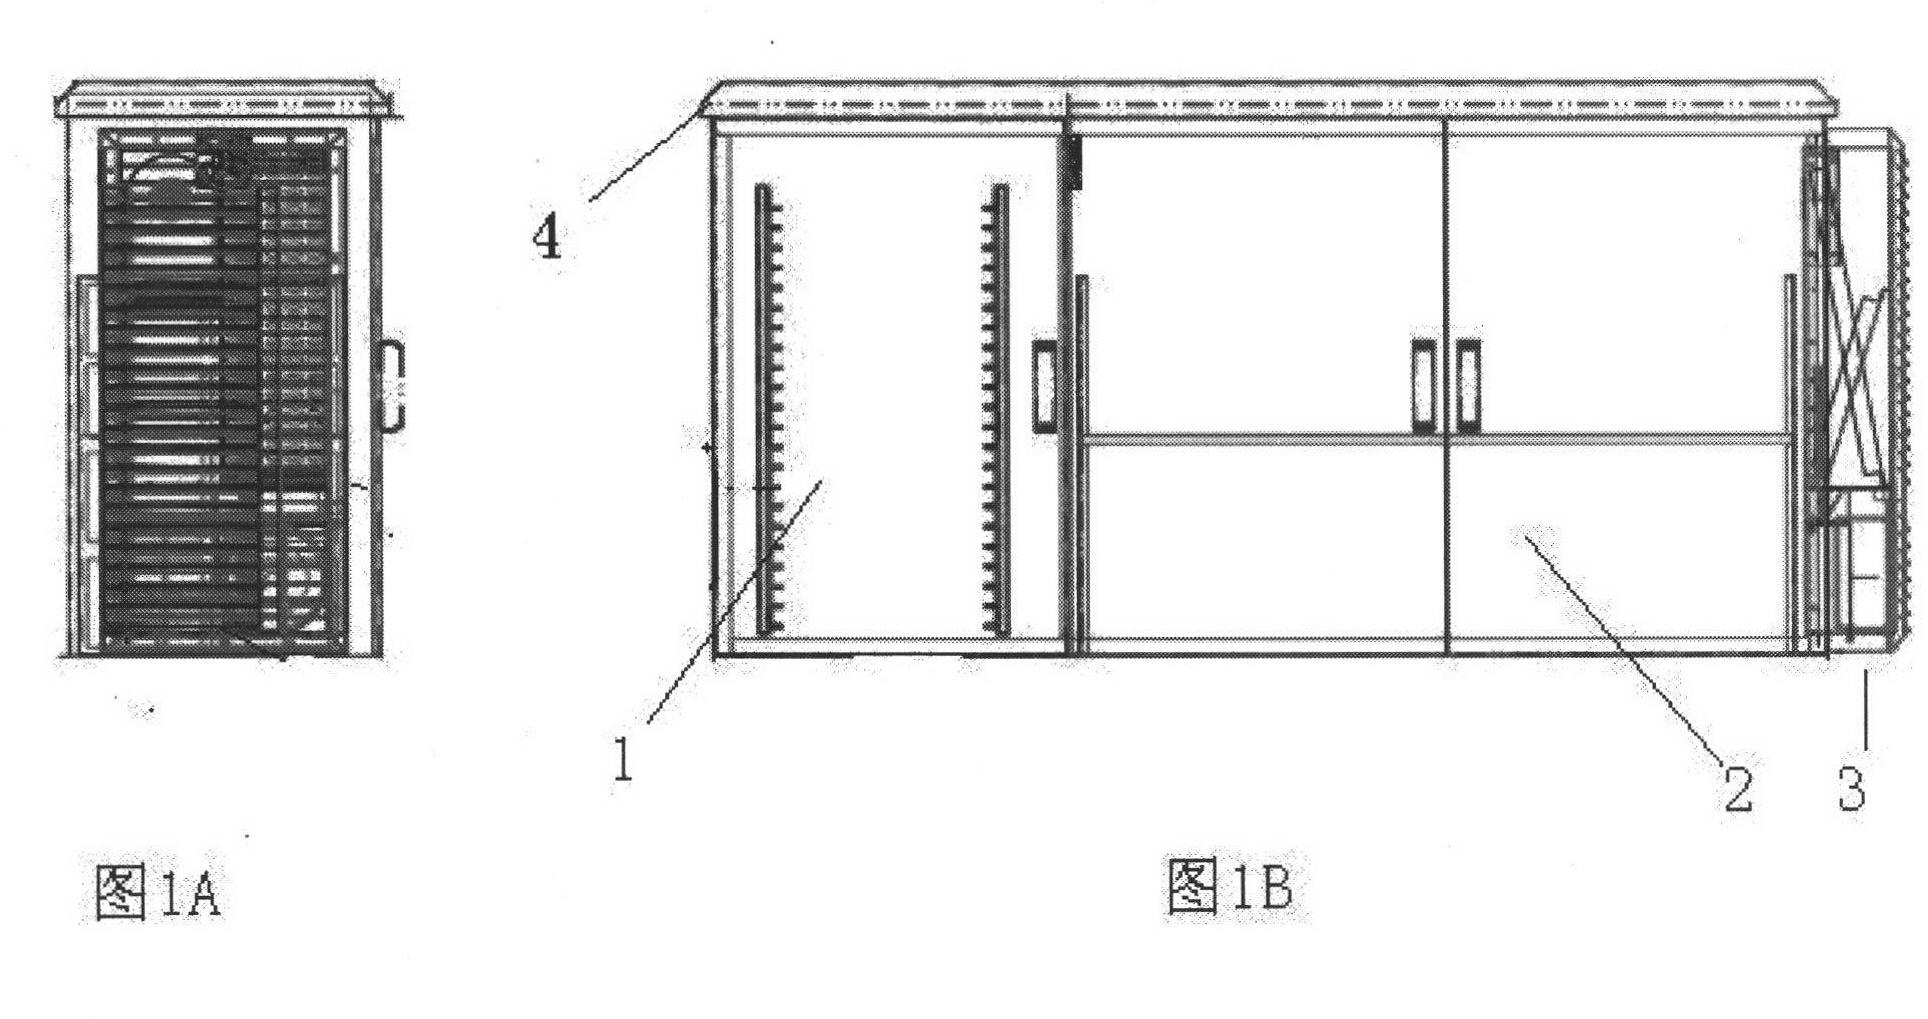 Hybrid energy LTE (Local Thermodynamic Equilibrium) cabinet air conditioning system